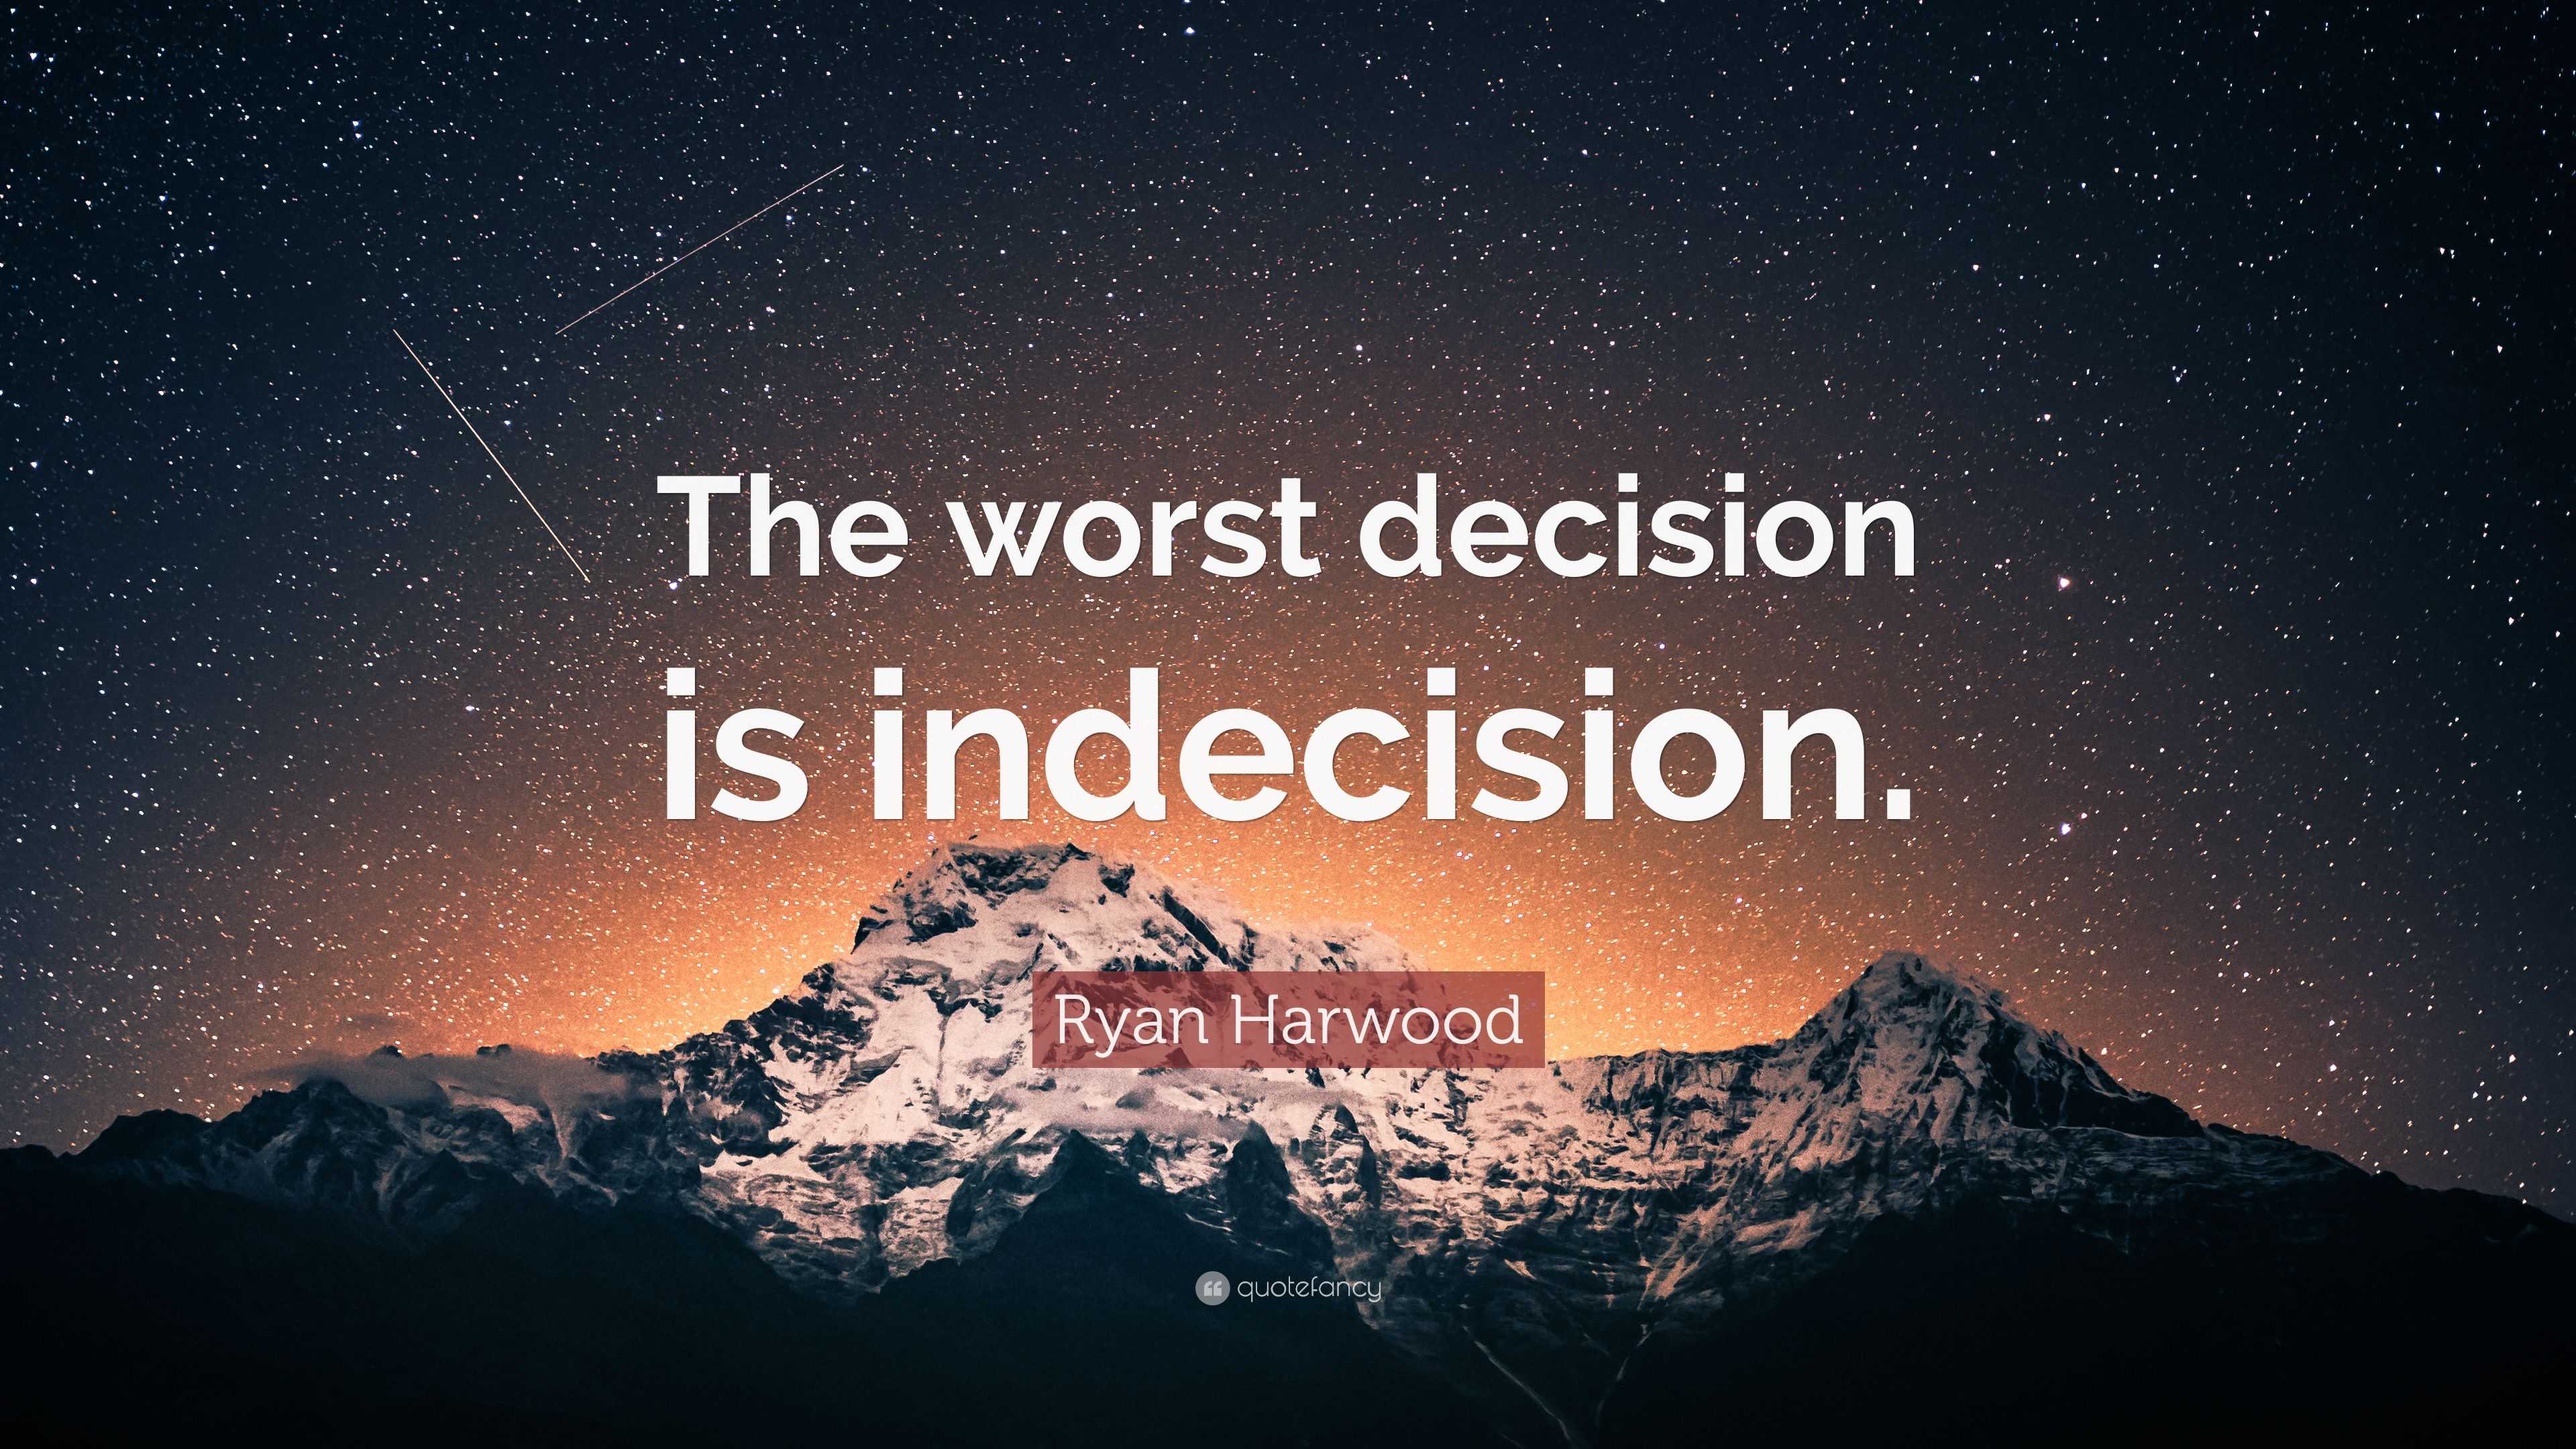 Ryan Harwood Quote “The worst decision is indecision.”